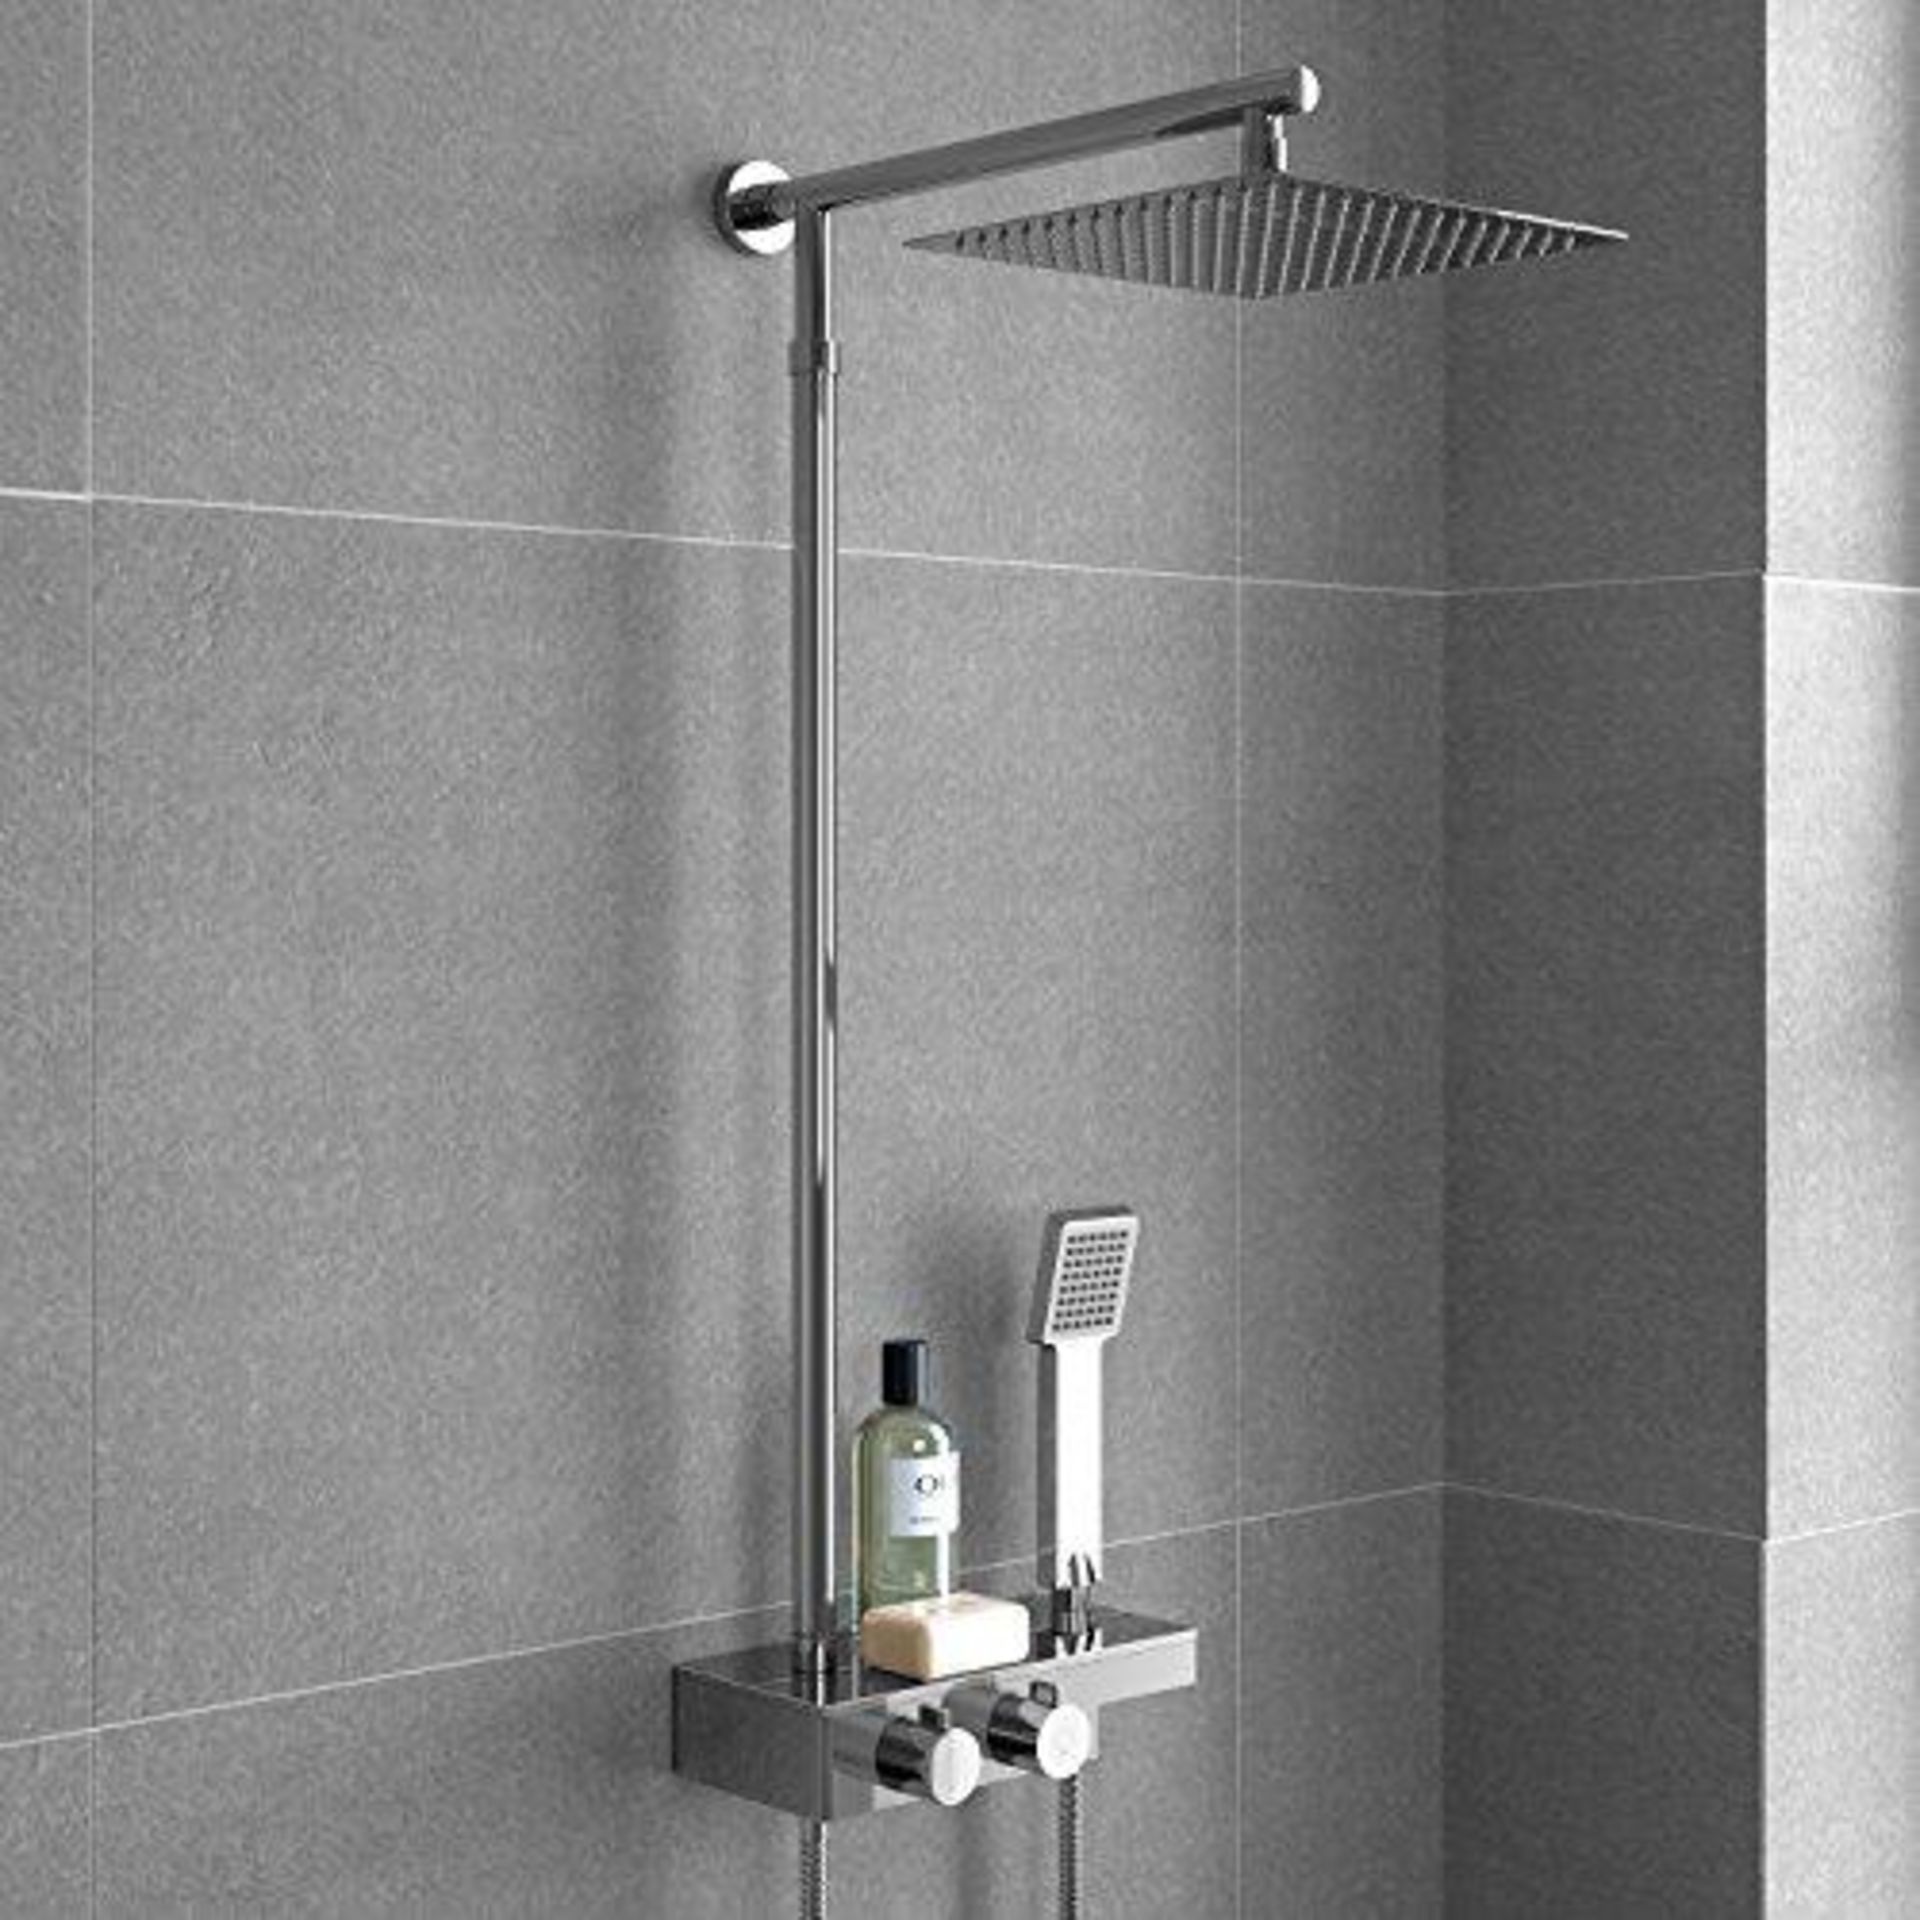 NEW & BOXED Square Thermostatic Bar Mixer Shower Set Valve with Shelf 10" Head + Handset. RRP ?... - Image 2 of 2